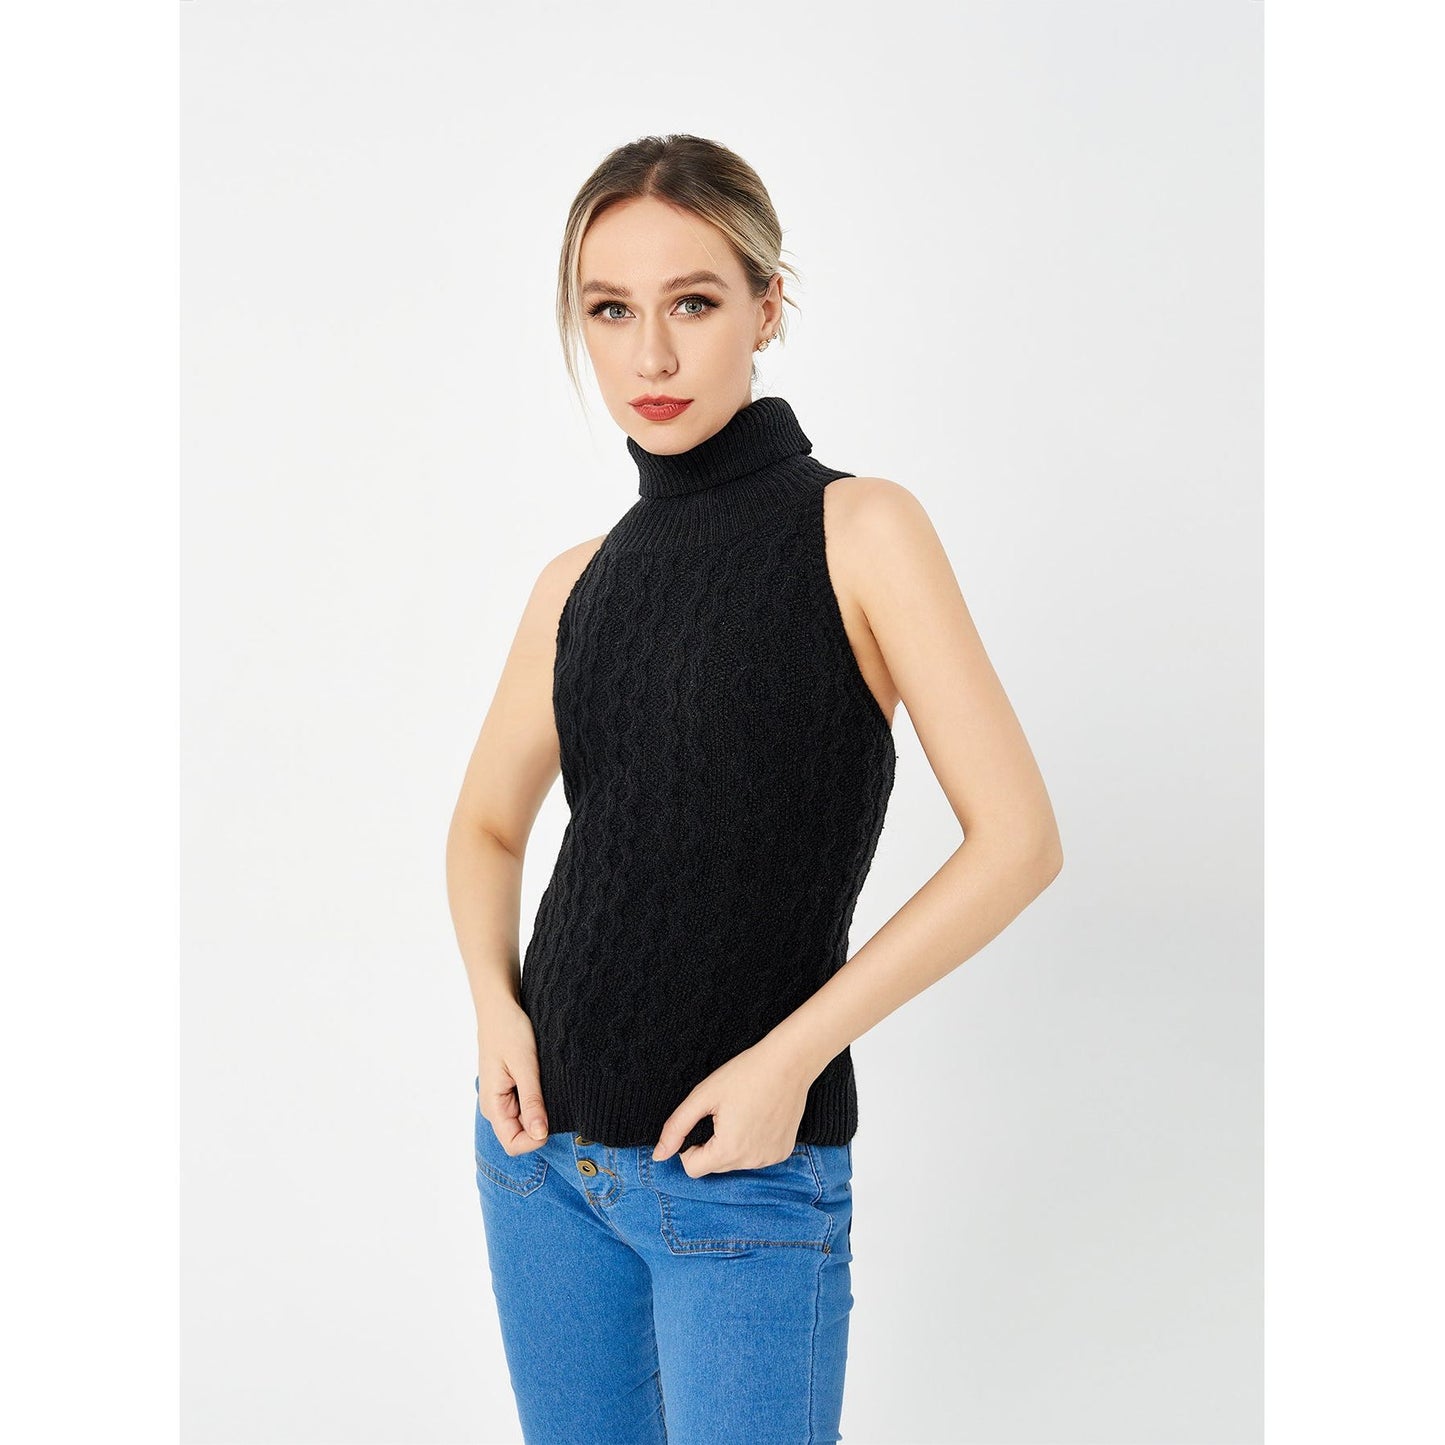 Buy Online Premimum Quality, Trendy and Highly Comfortable Stretch Casual Turtleneck Sweater - FEYONAS